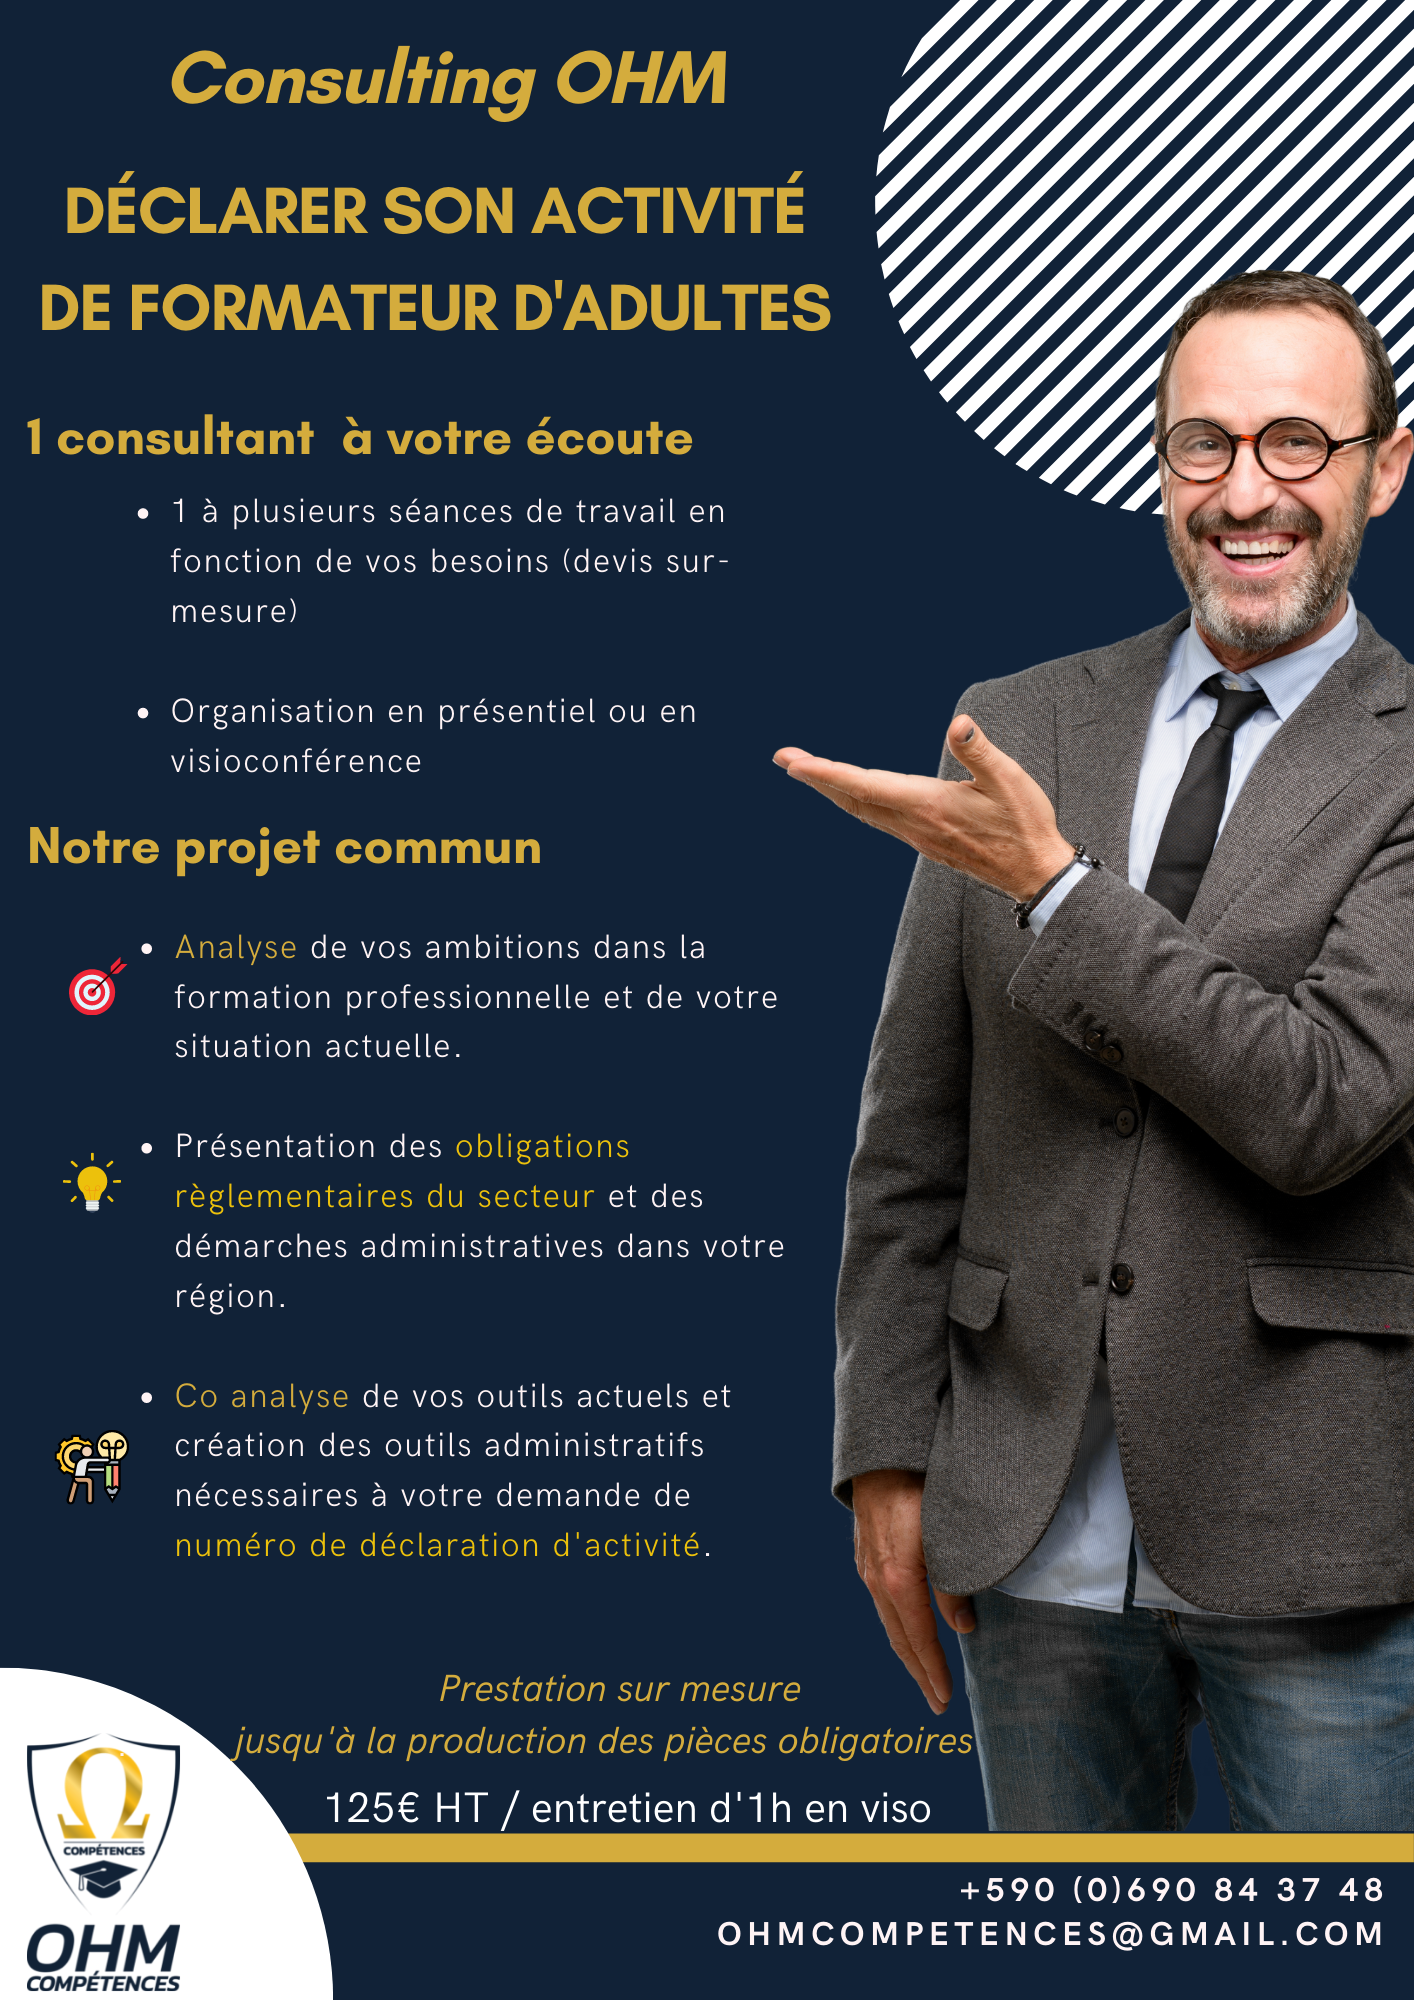 Consulting formateur